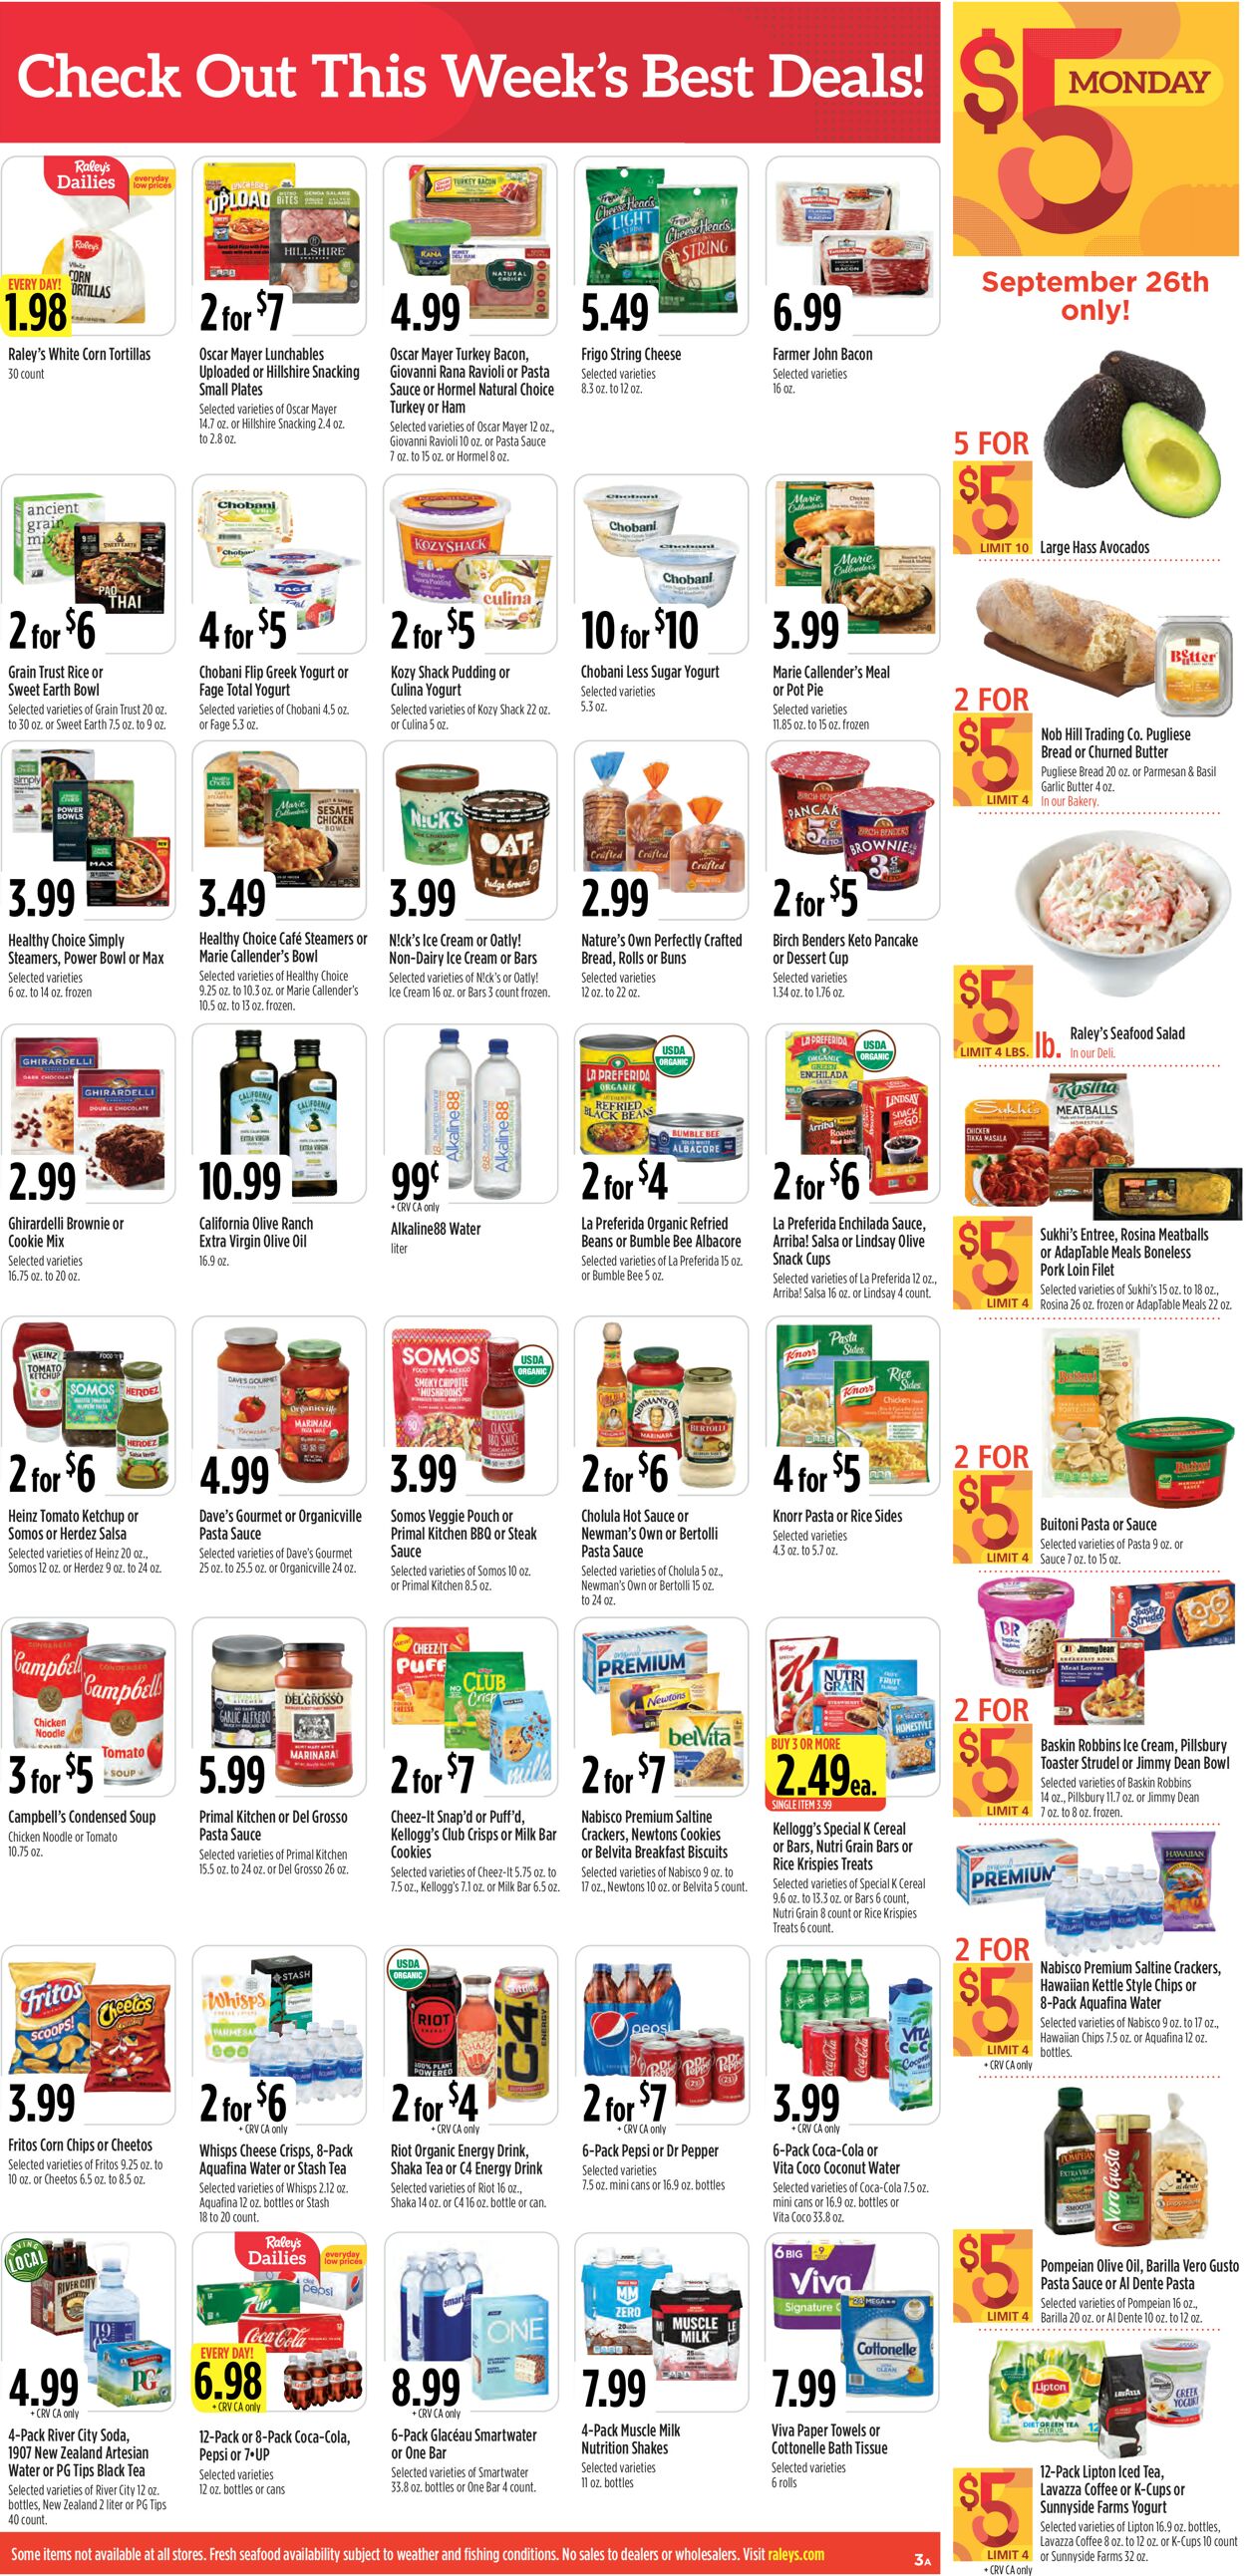 Raley's Ad from 09/21/2022